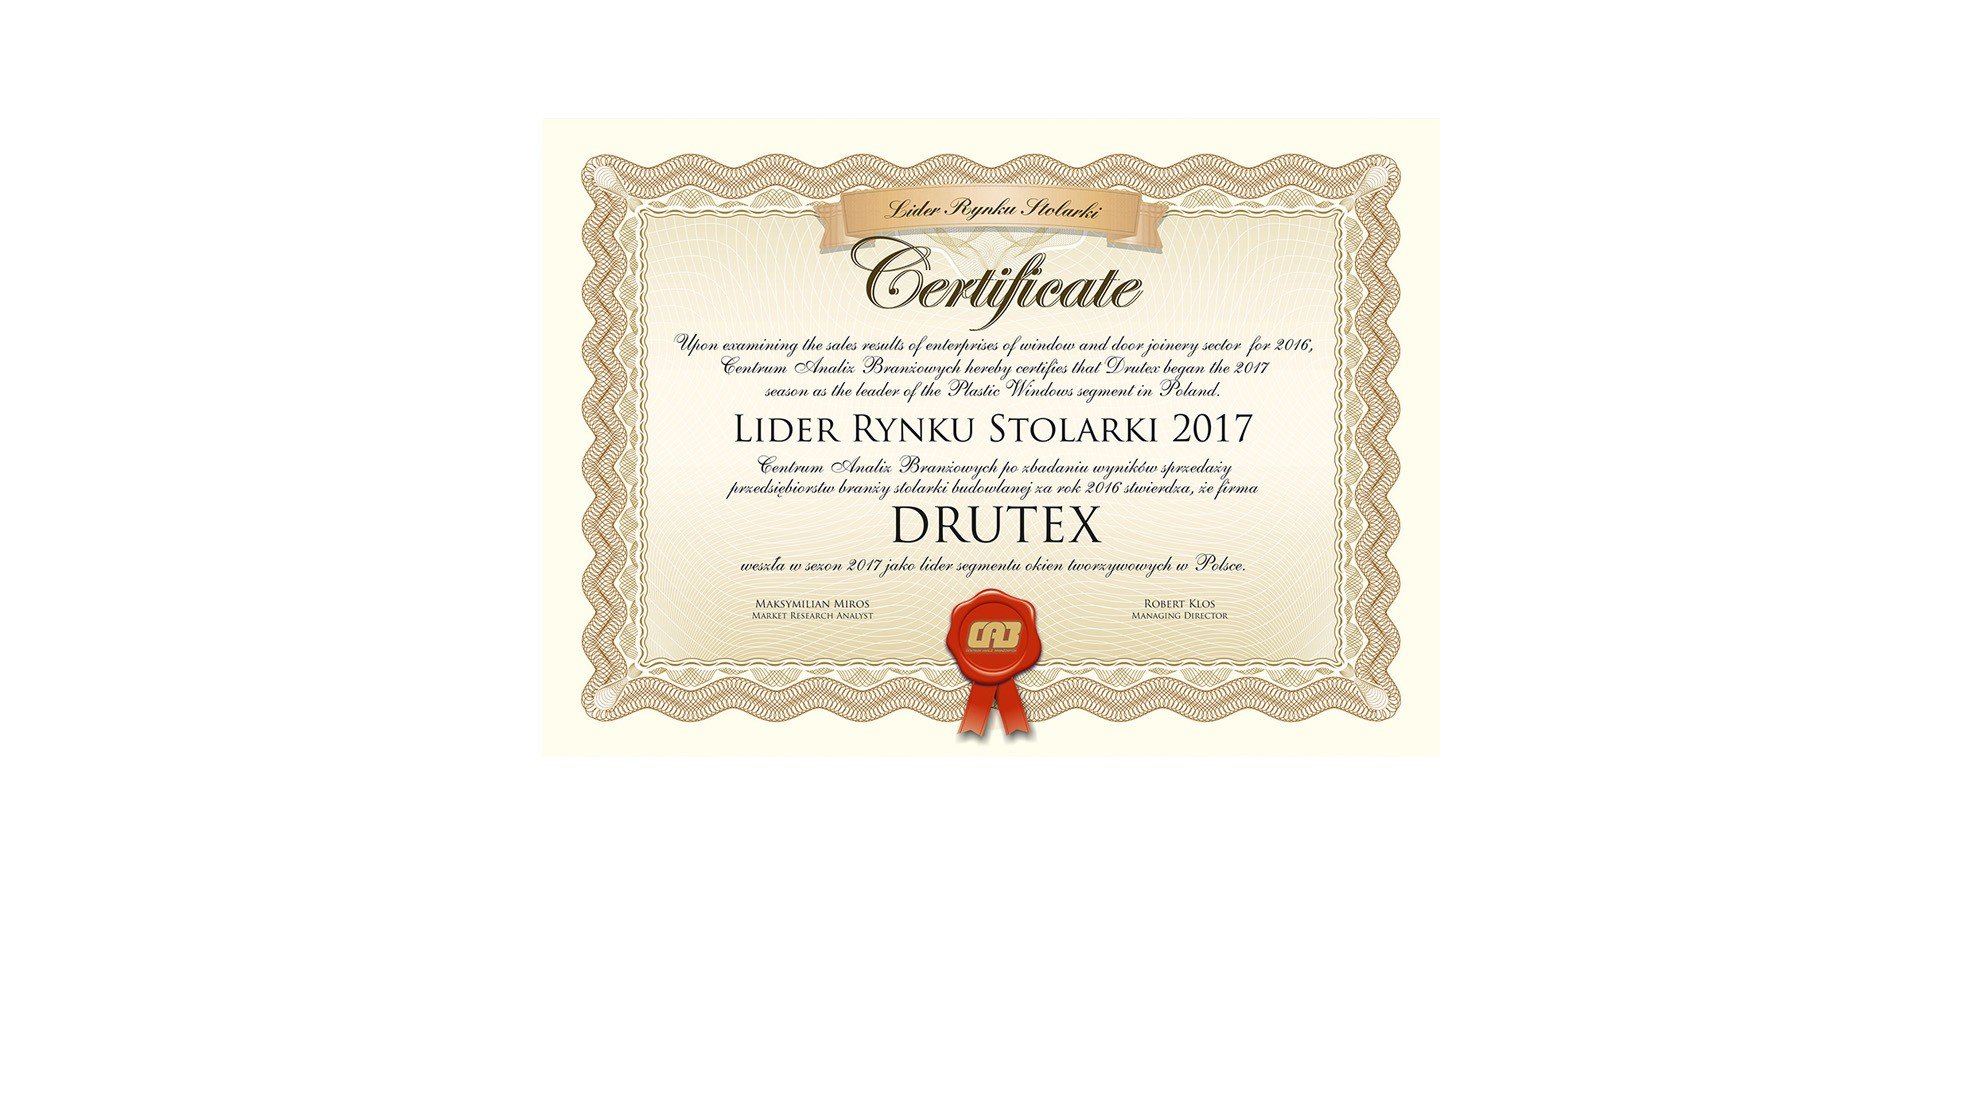 Drutex strengthens its market leader position in Poland!